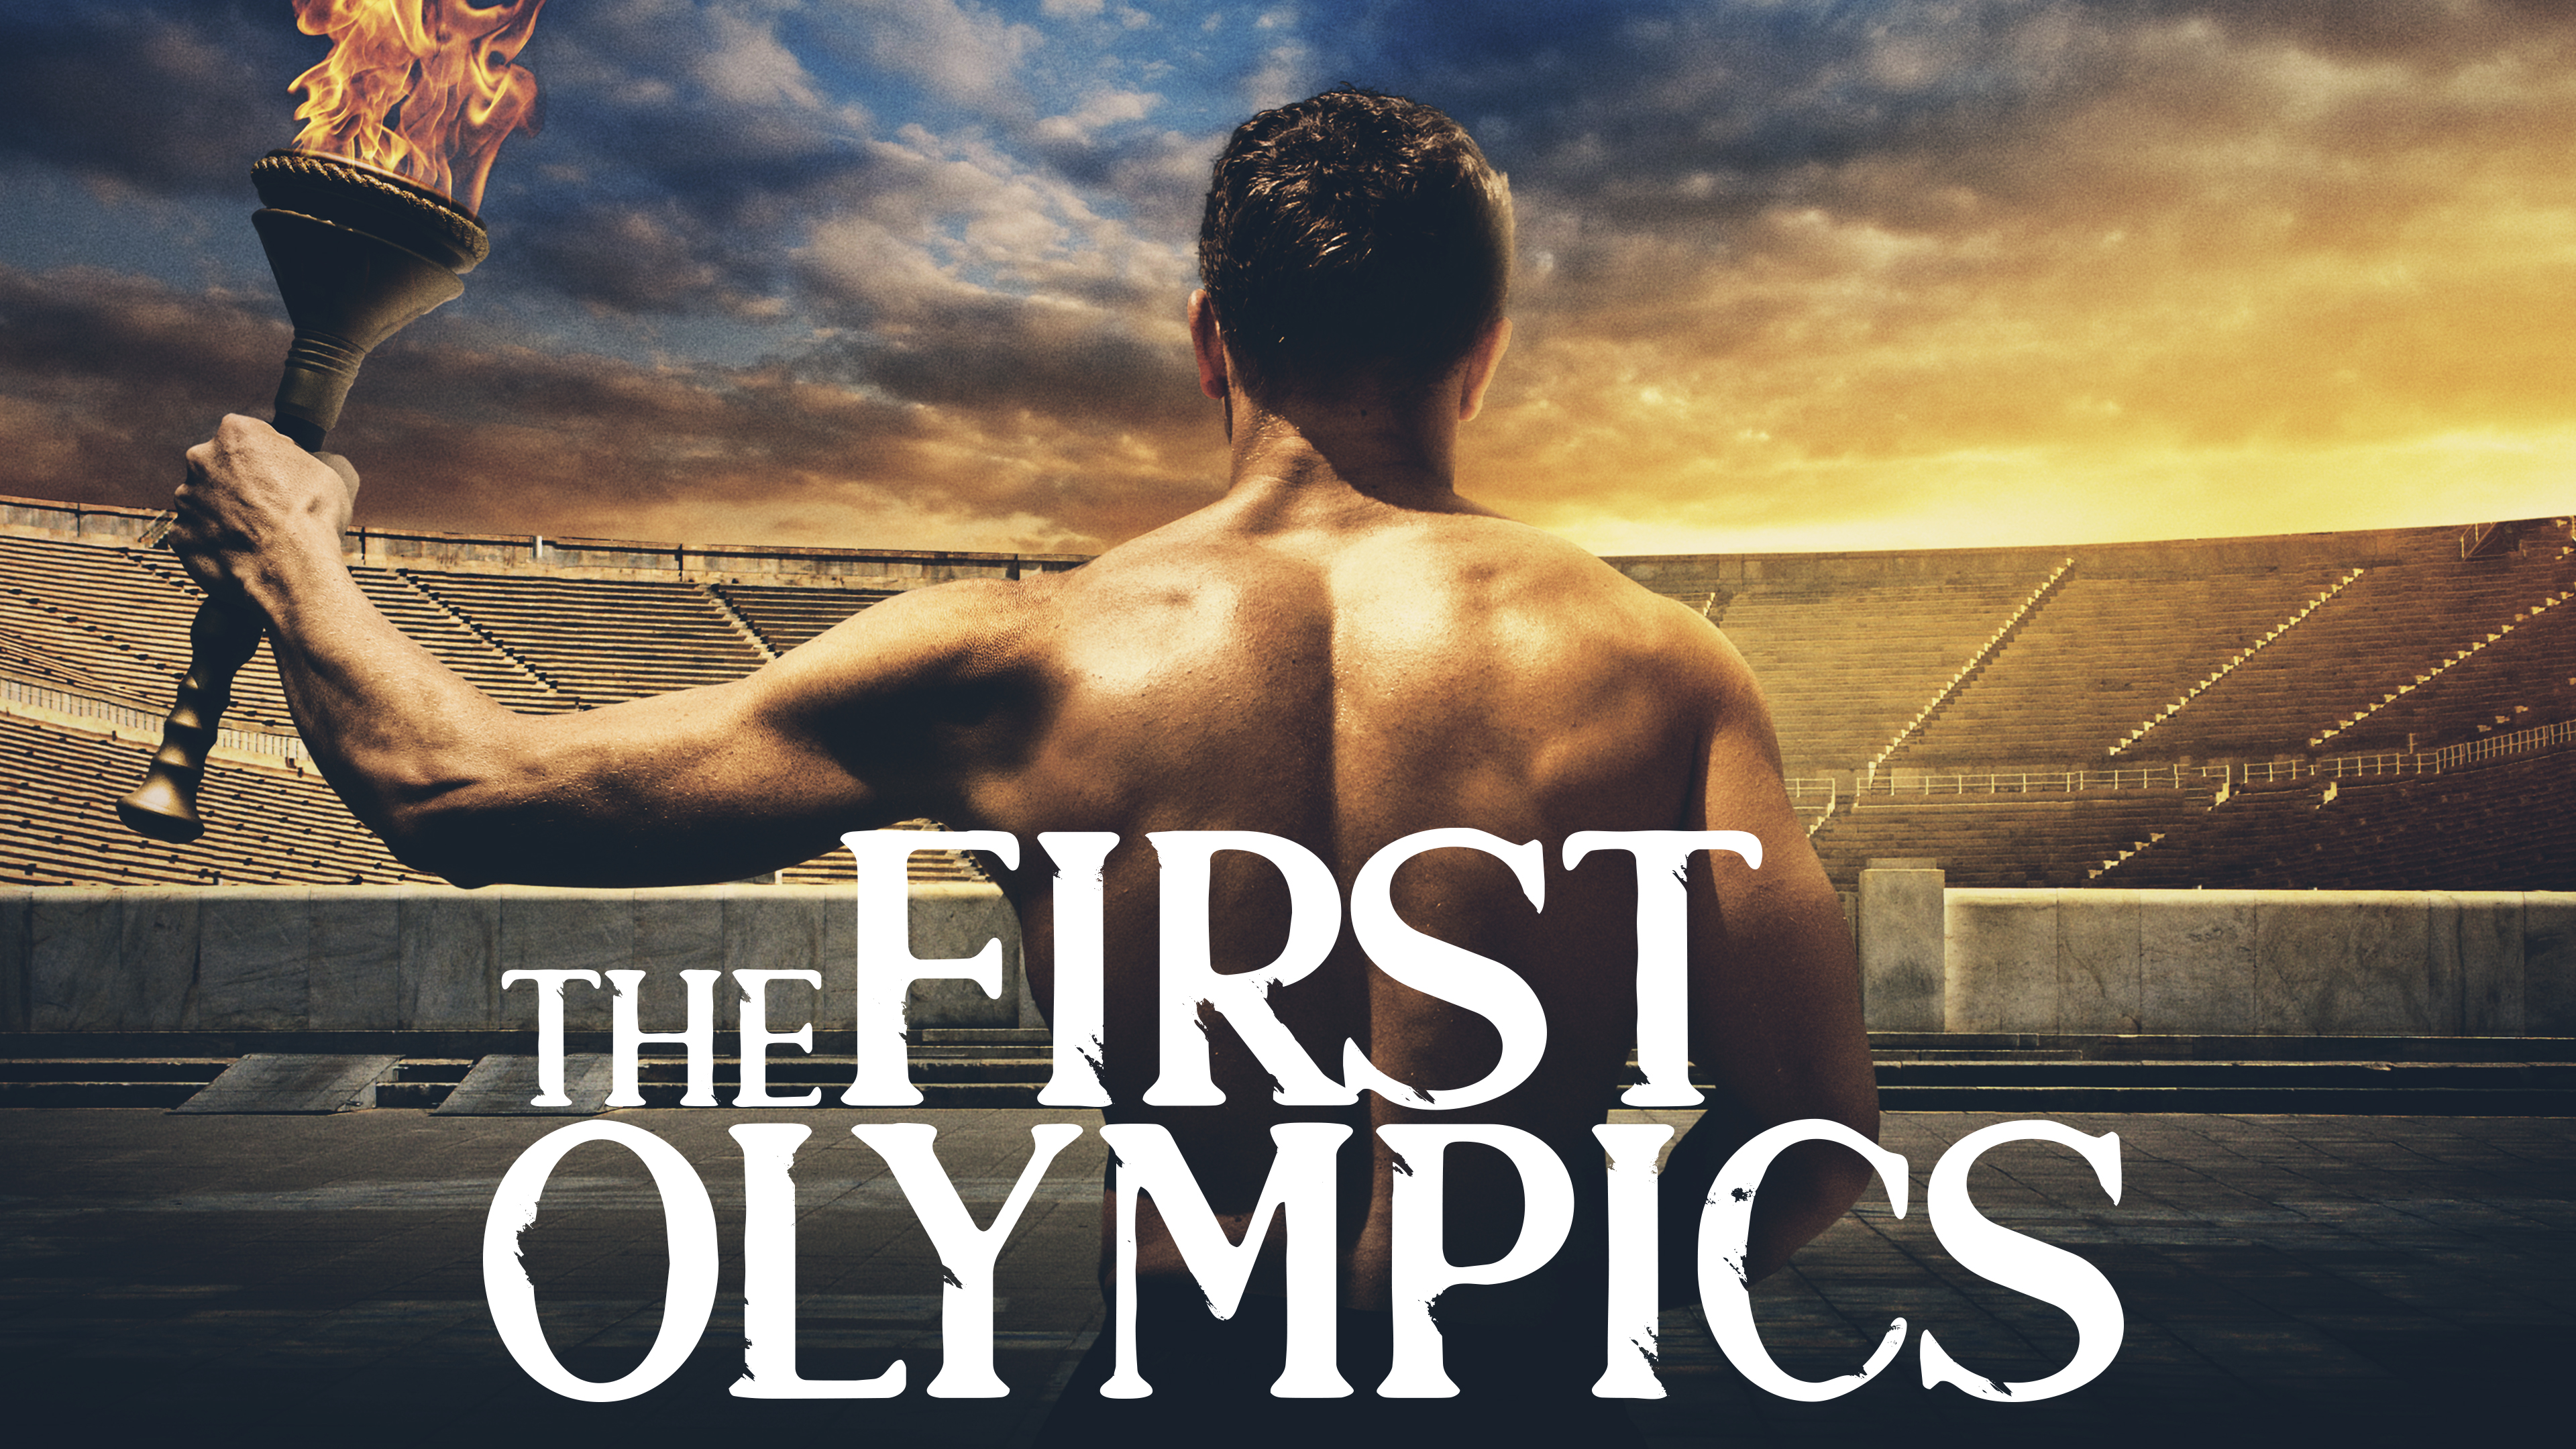 Watch 'The First Olympics' on HISTORY Vault!